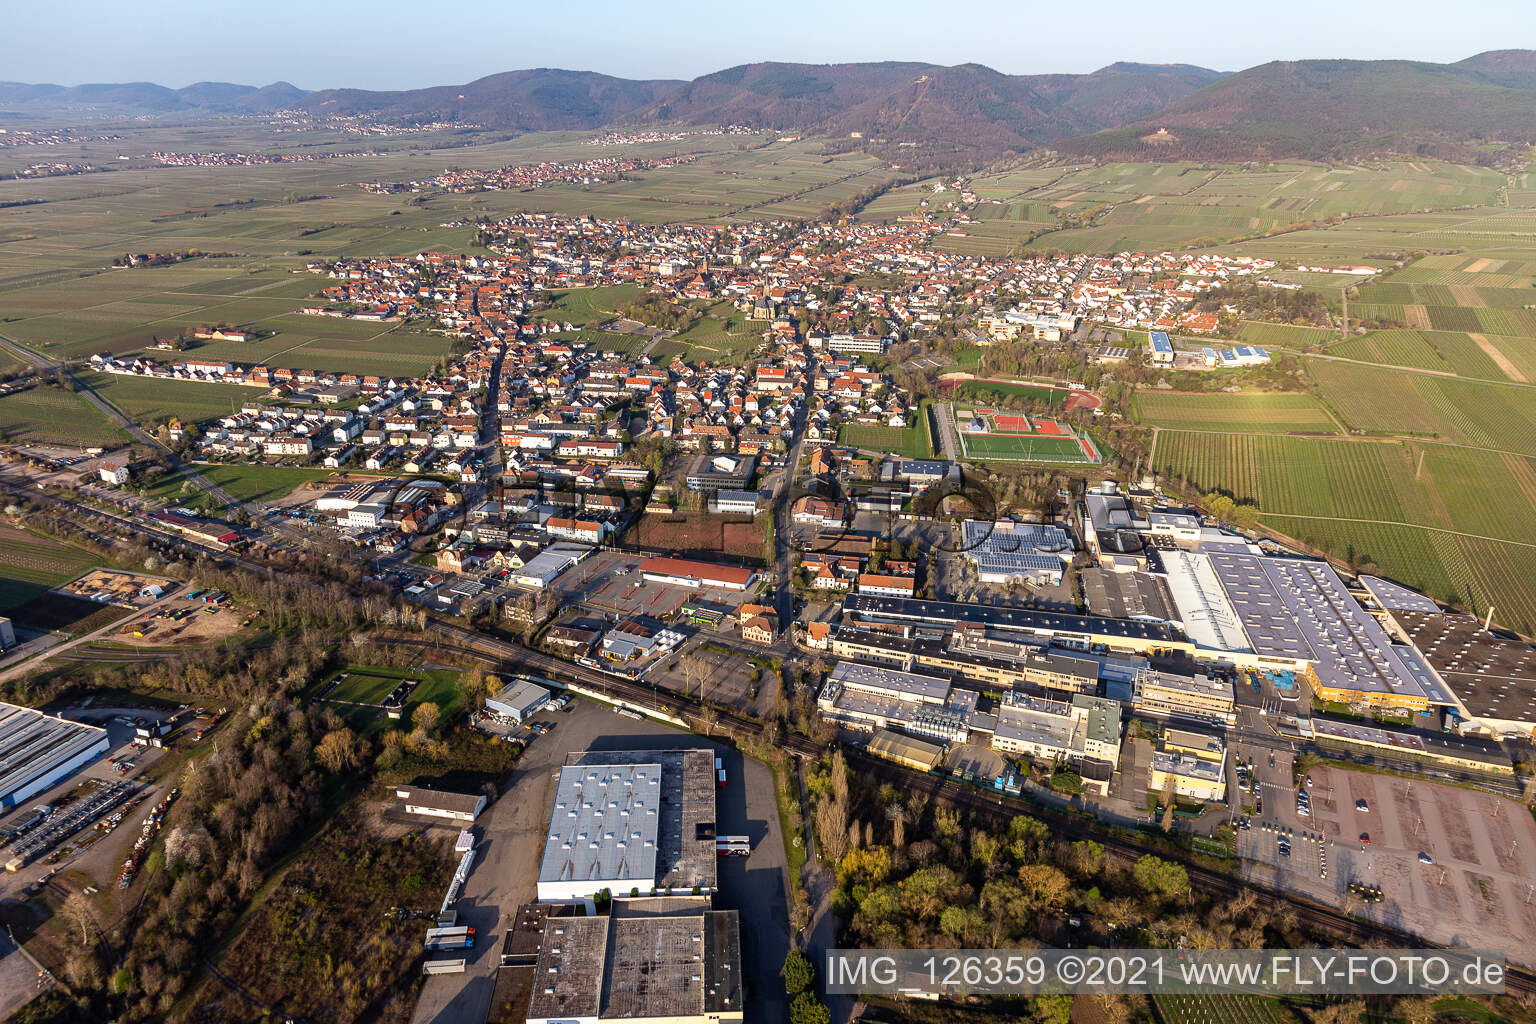 Aerial photograpy of Location view of the streets and houses of residential areas in the rhine valley landscape surrounded by mountains in Edenkoben in the state Rhineland-Palatinate, Germany